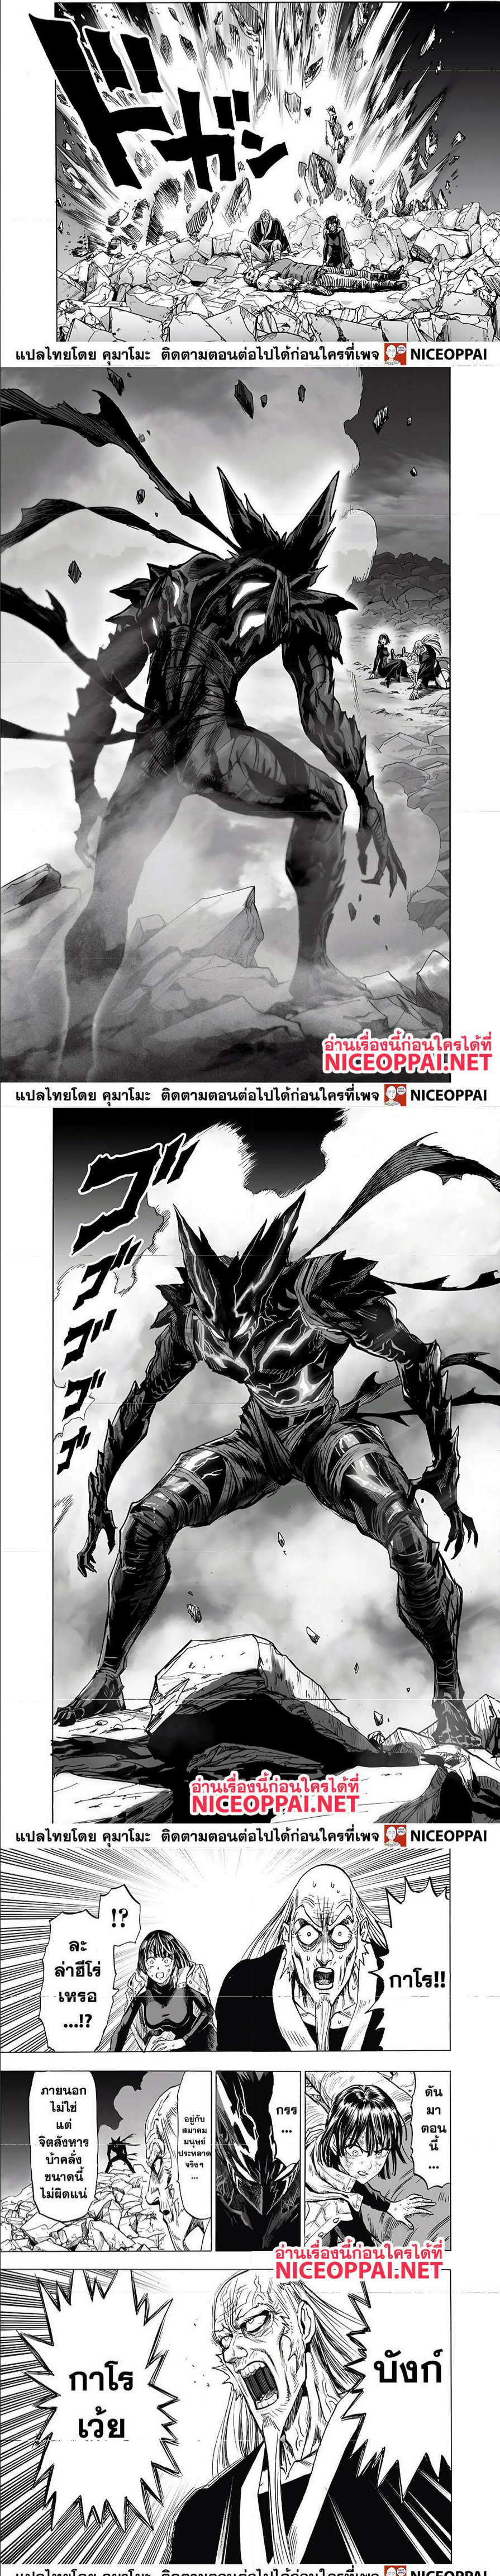 One Punch Man 146 (6)